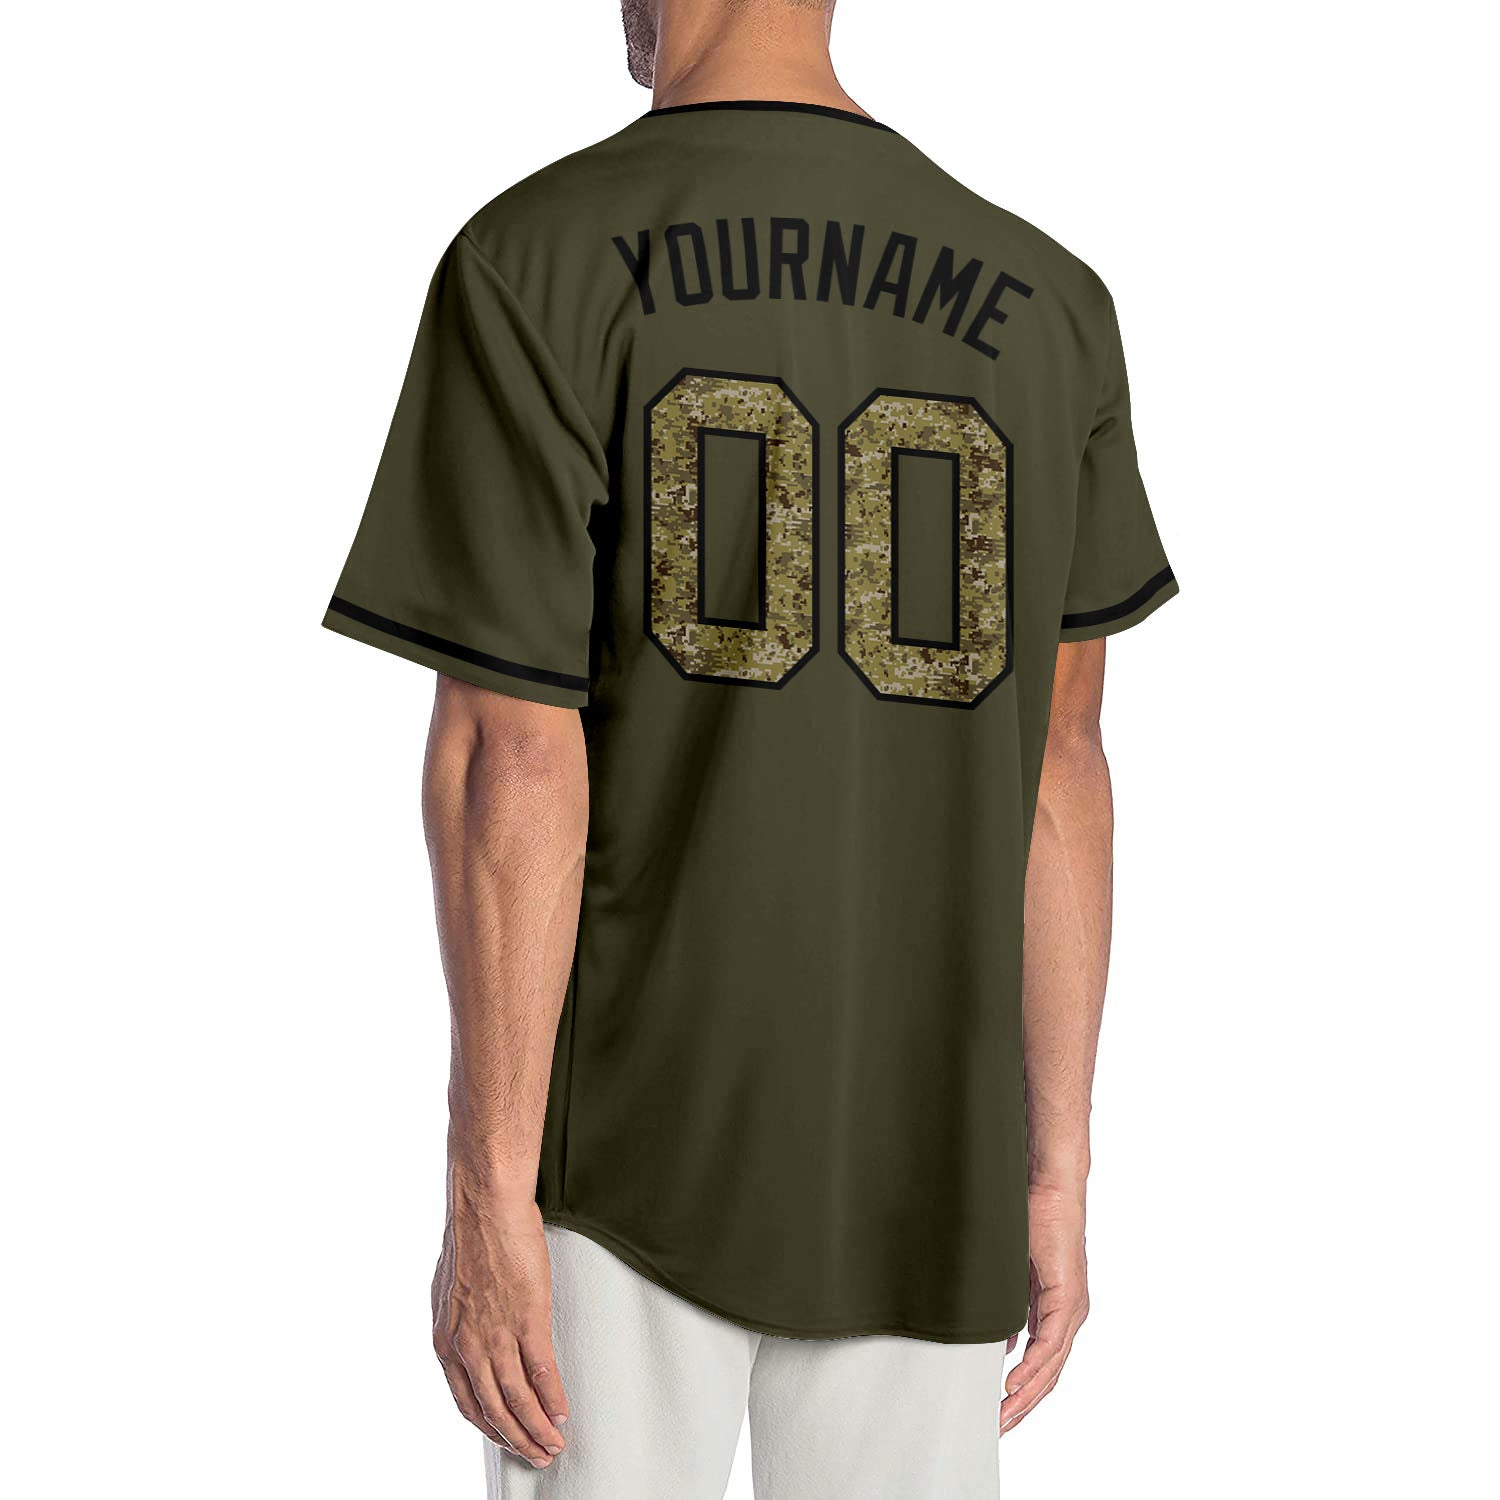 Custom Olive Red-Black Authentic Salute To Service Baseball Jersey